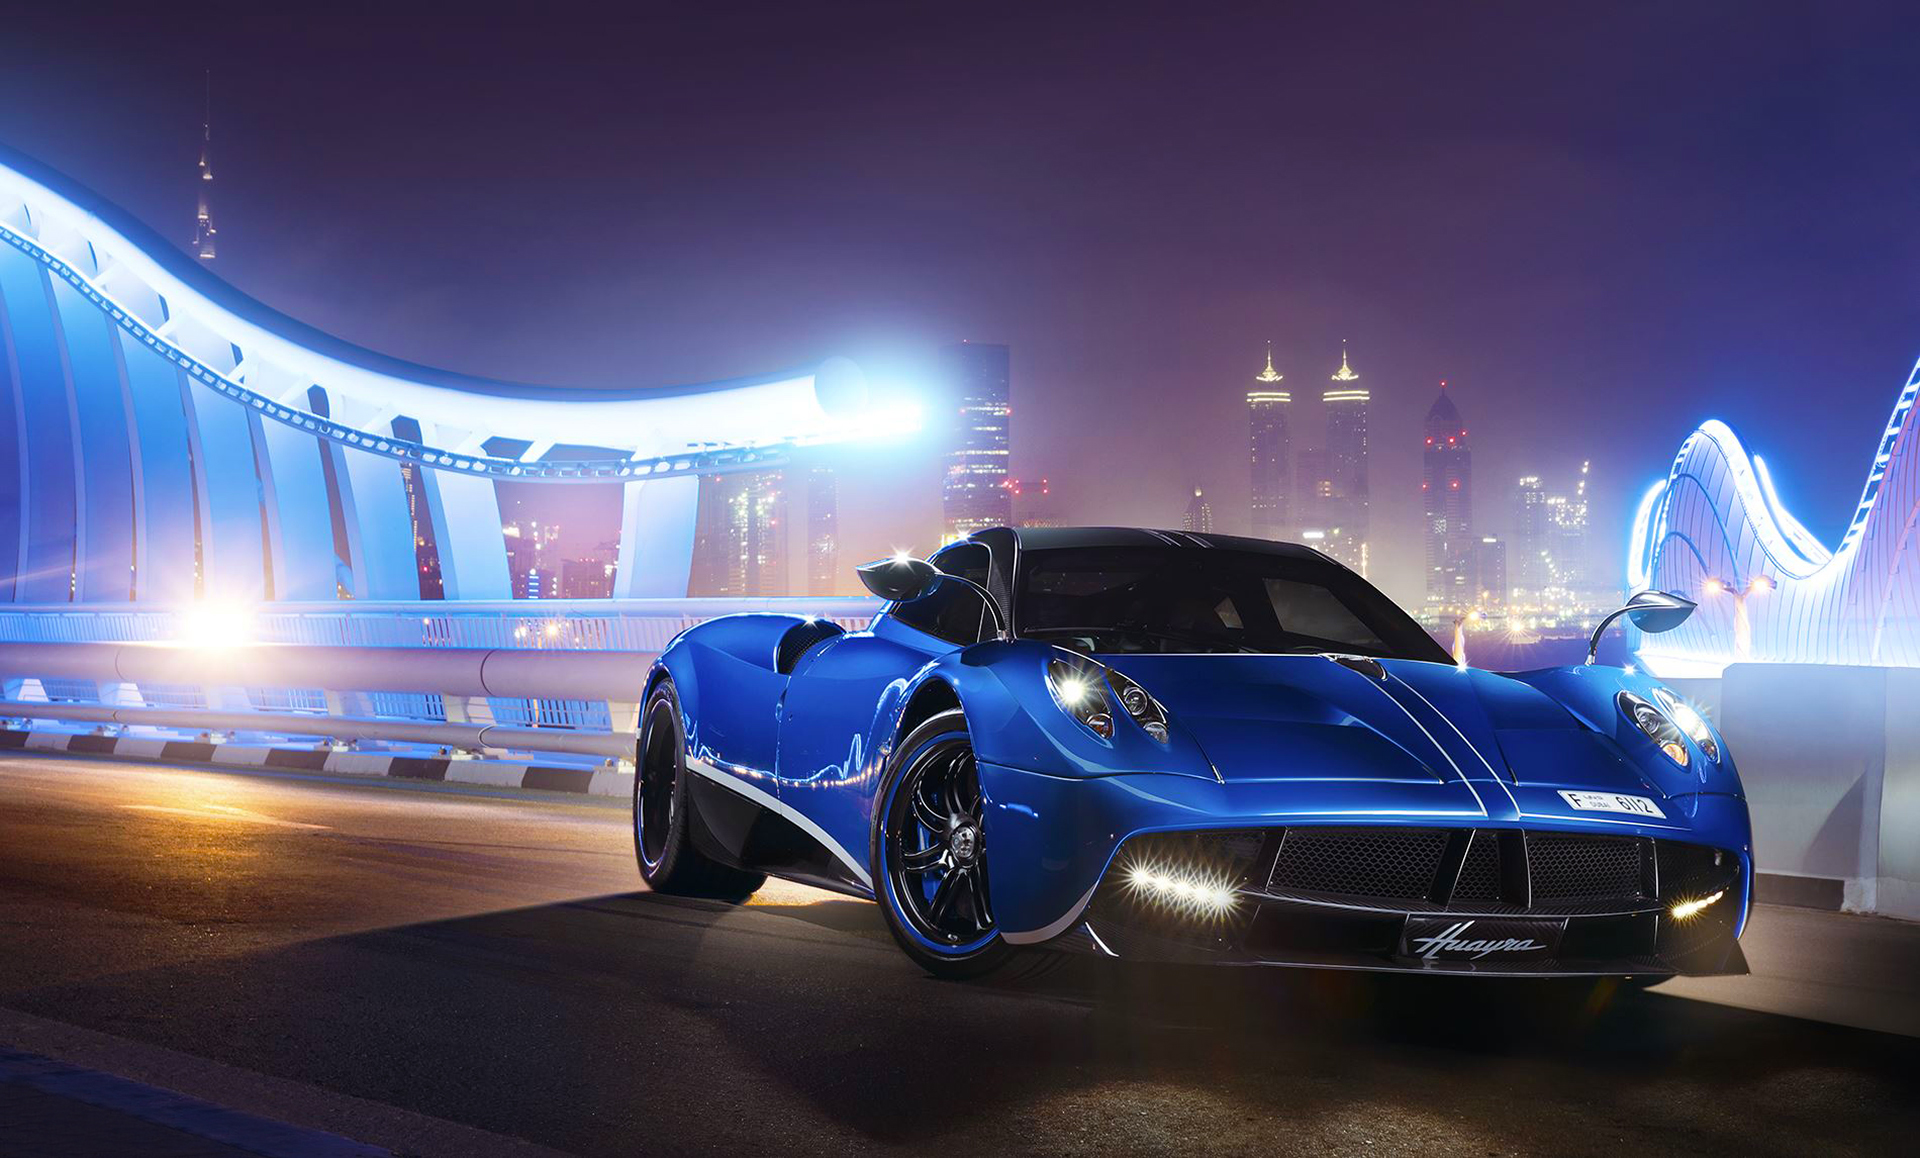 142401 download wallpaper night, pagani, cars, blue, front view, huayra screensavers and pictures for free